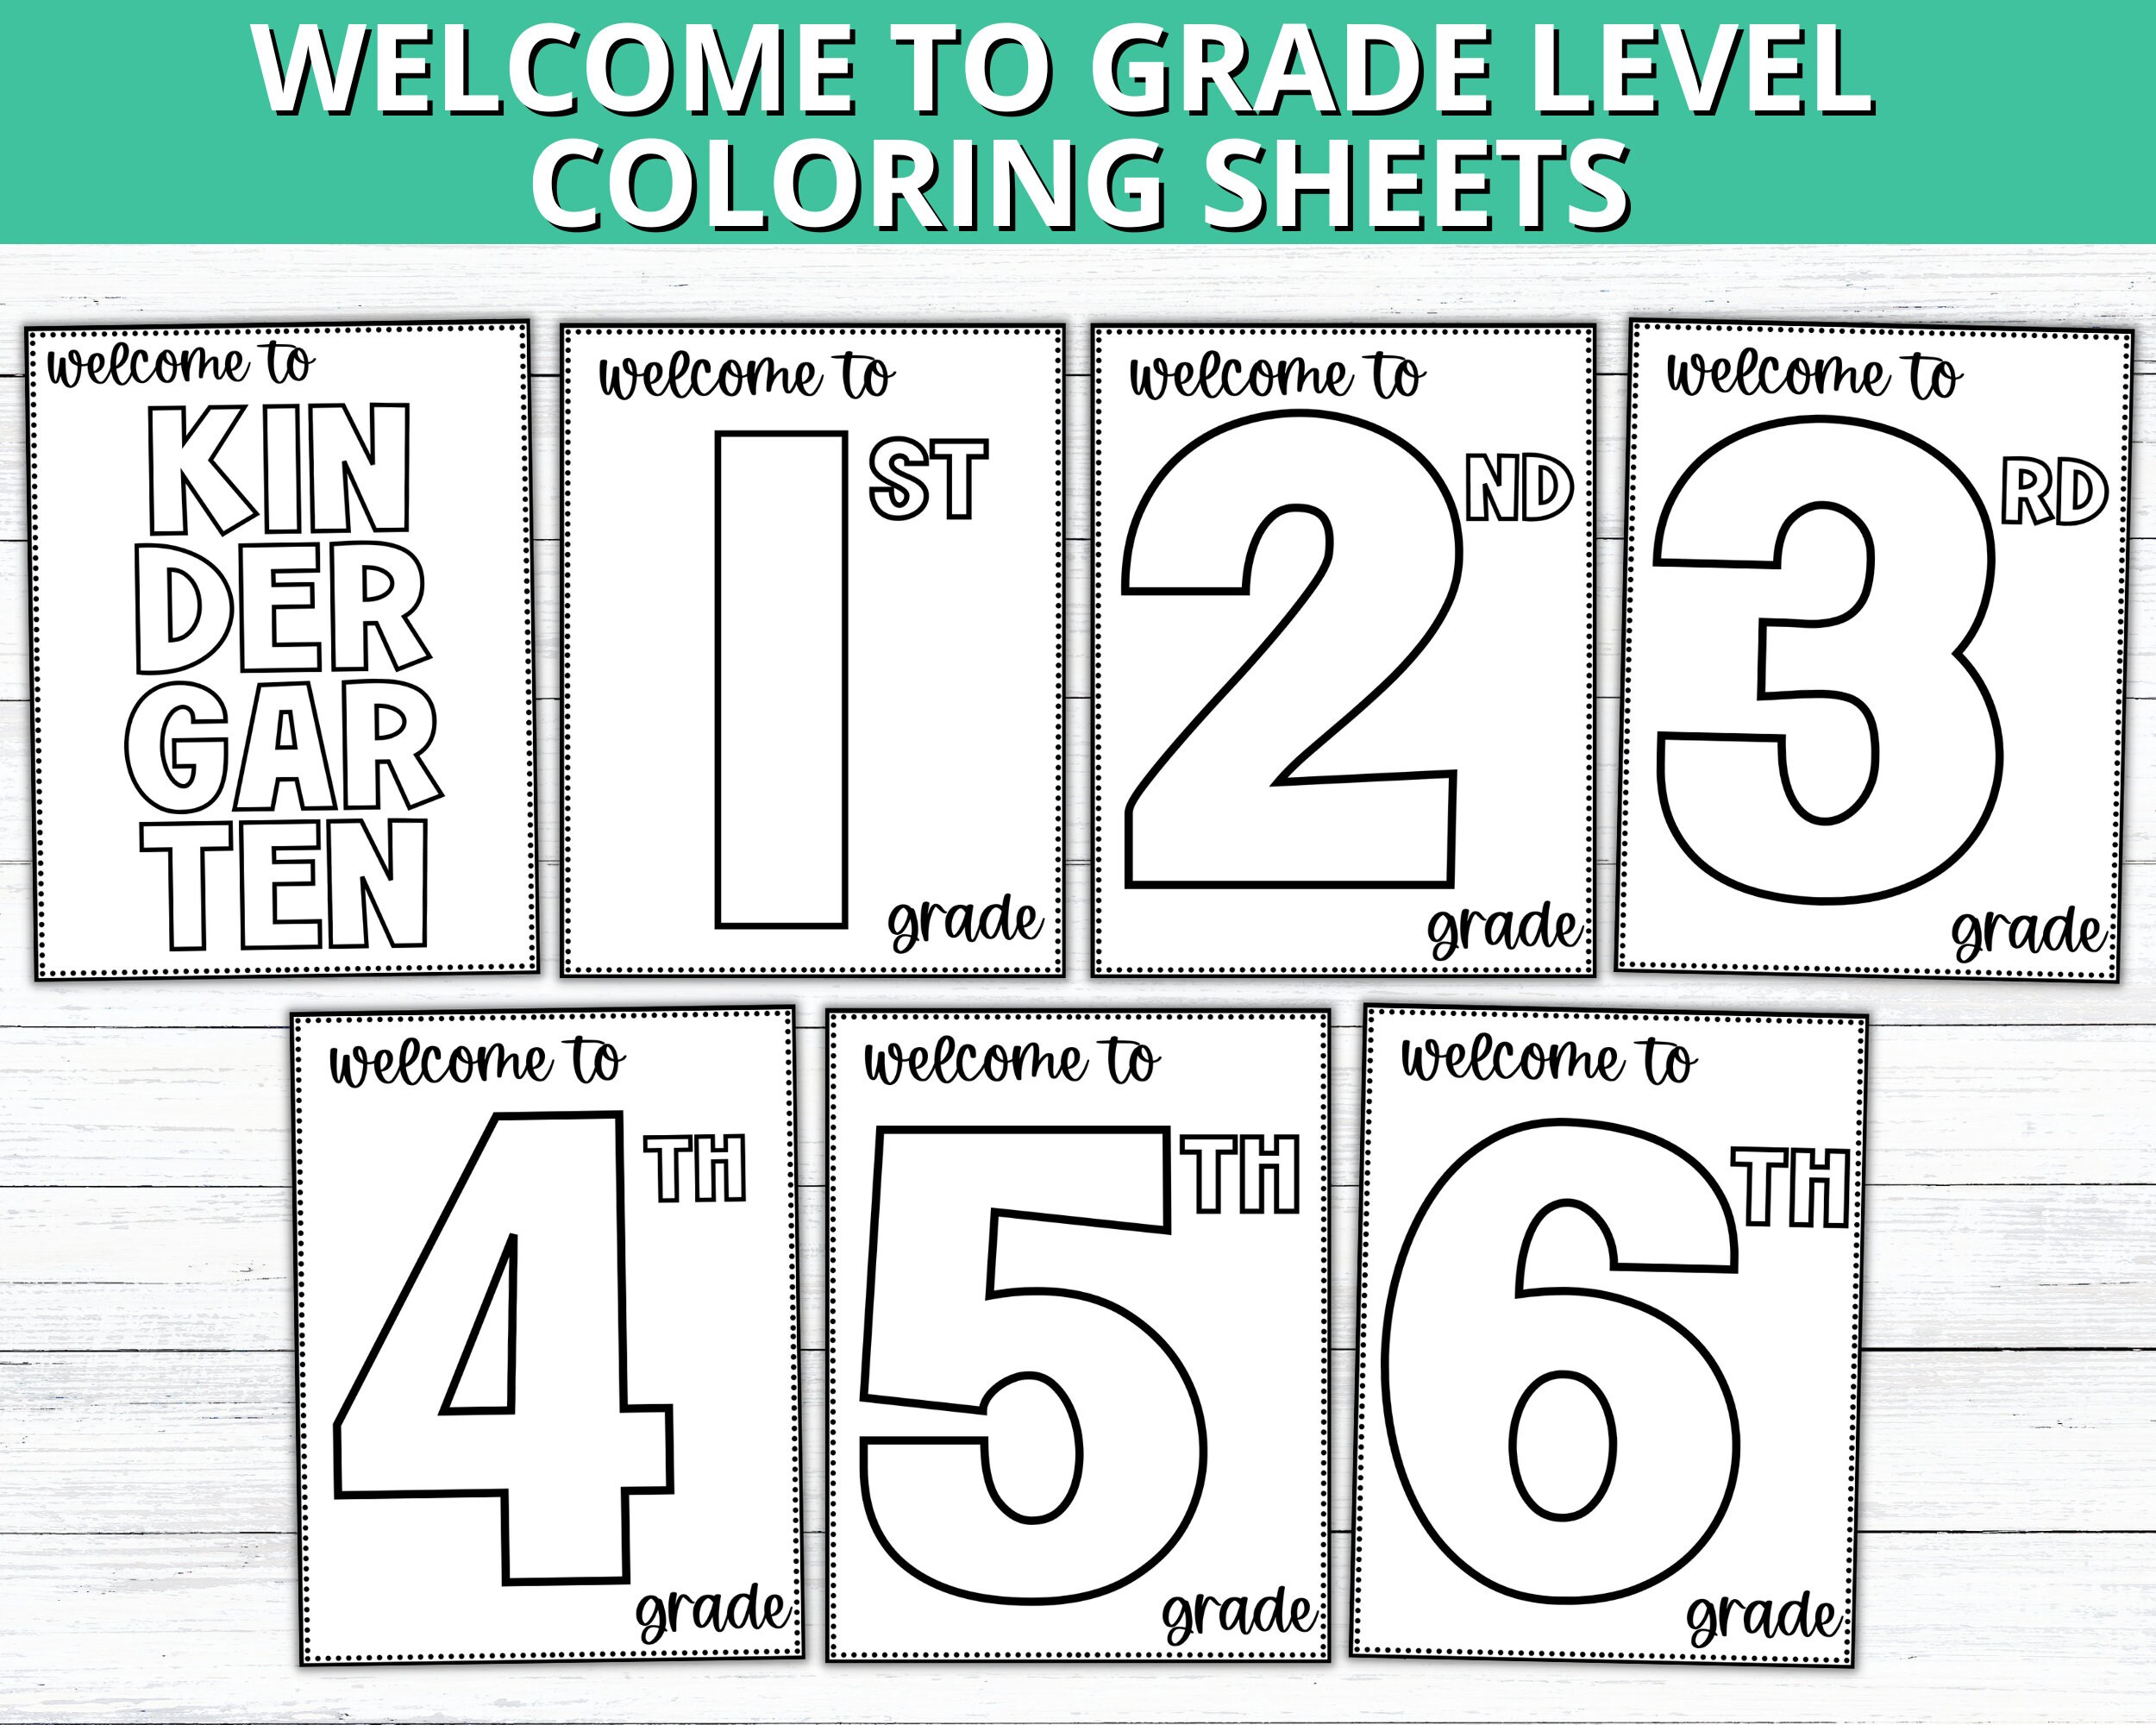 Back to grade level coloring sheets first day of school grade level coloring page icebreaker for kids back to school activity